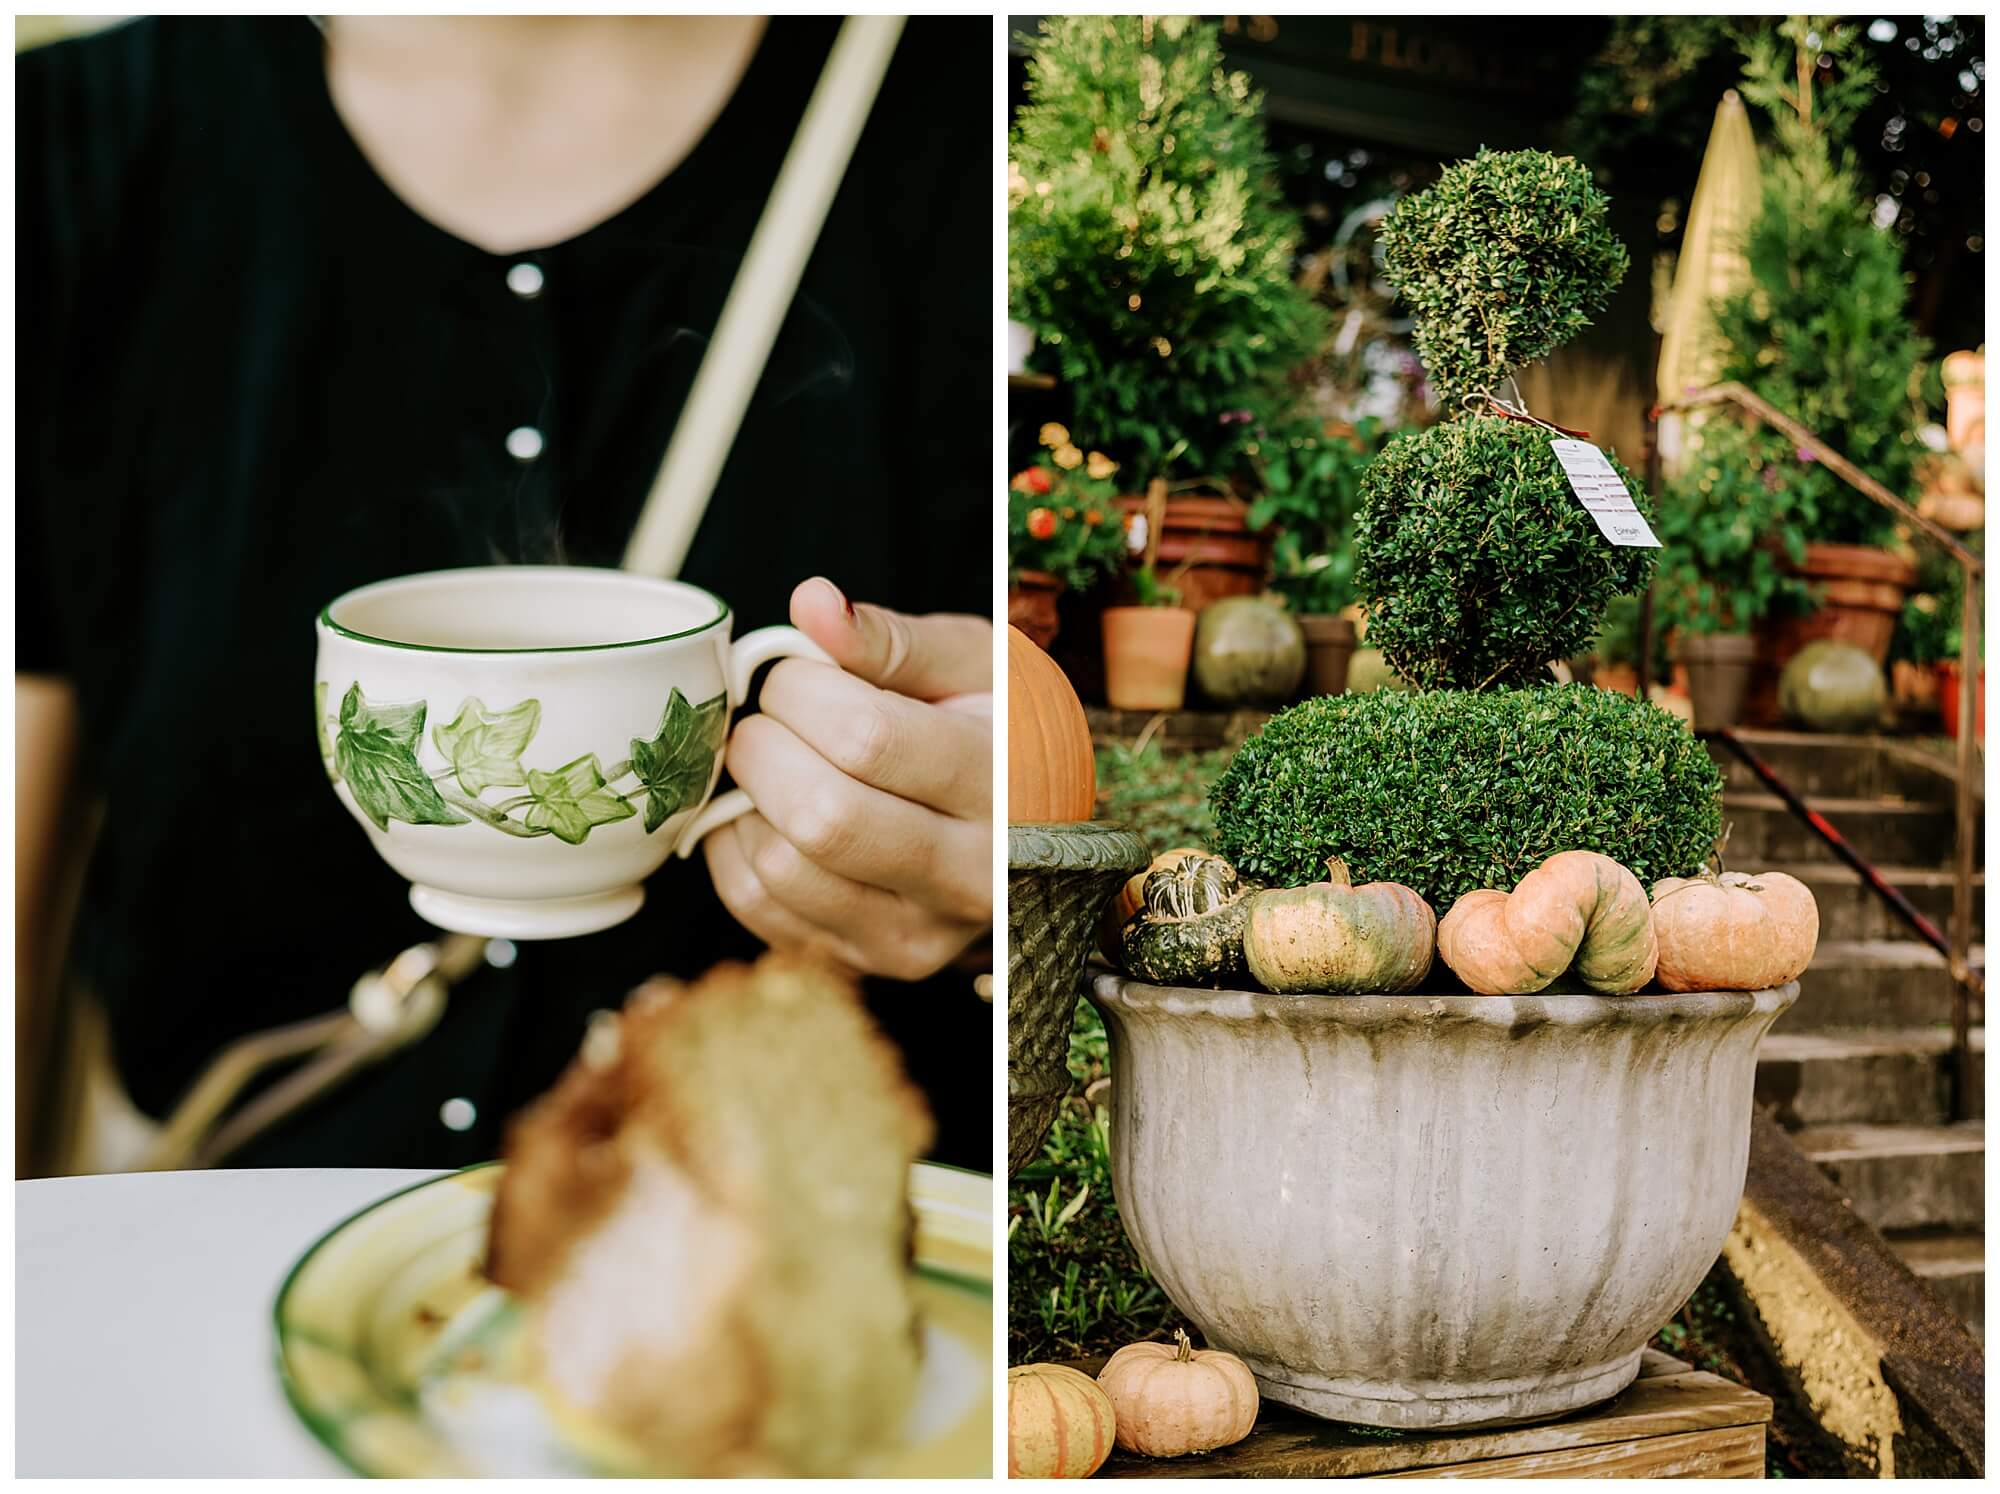 Left: teacup with green leaf decoration at General Birmingham right: planter with topiary and pumpkins at Shoppe General Birmingham